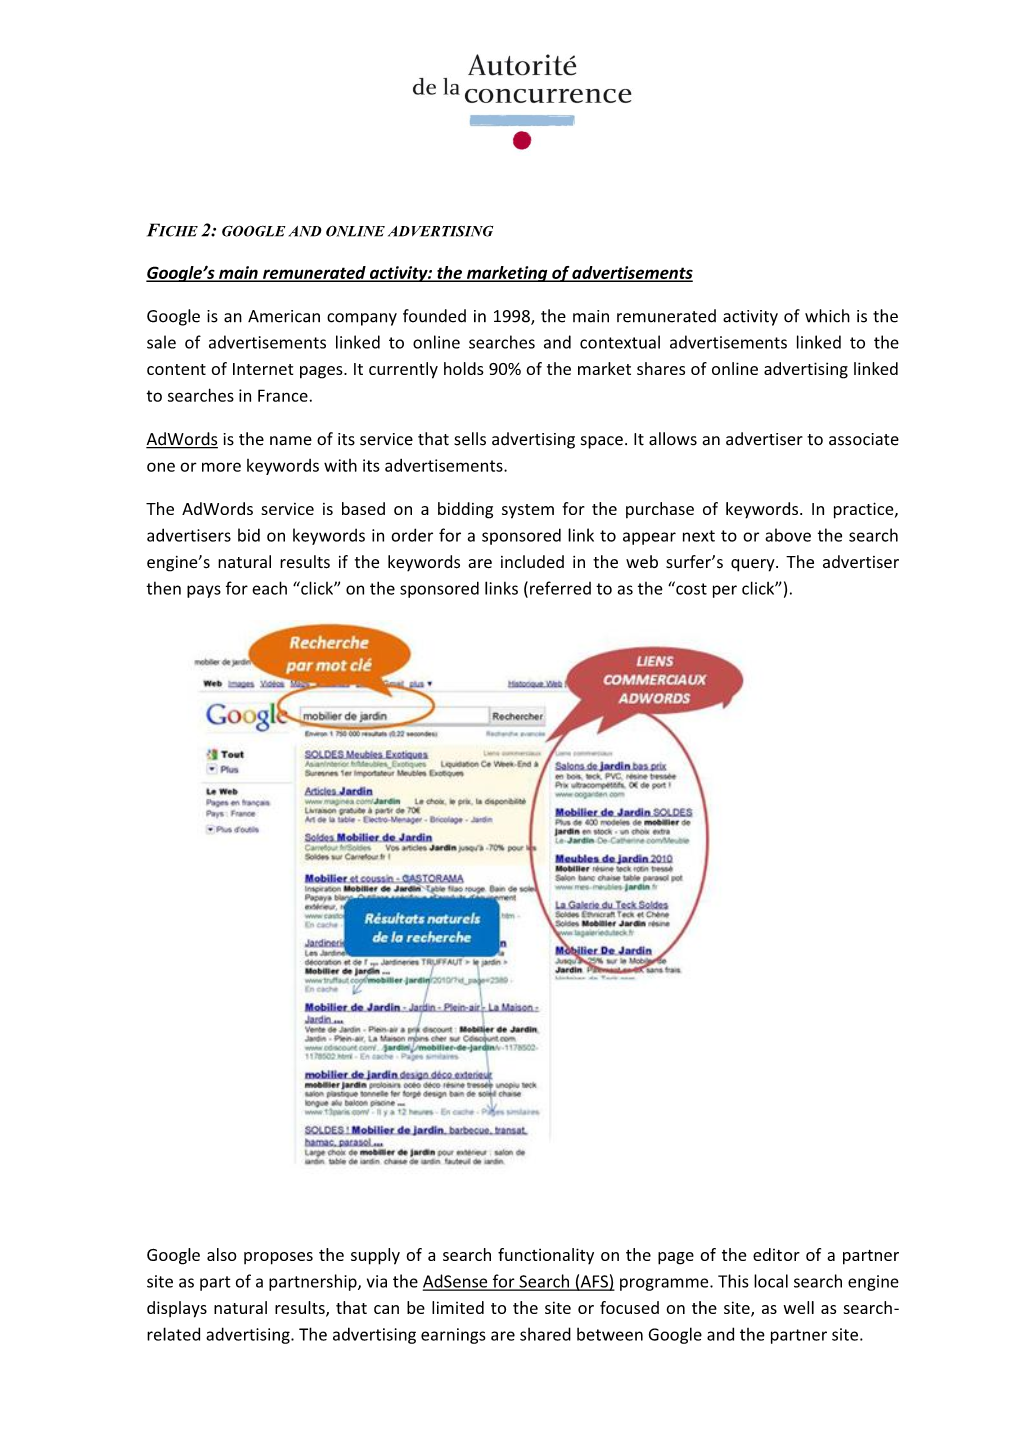 Fiche 2: Google and Online Advertising